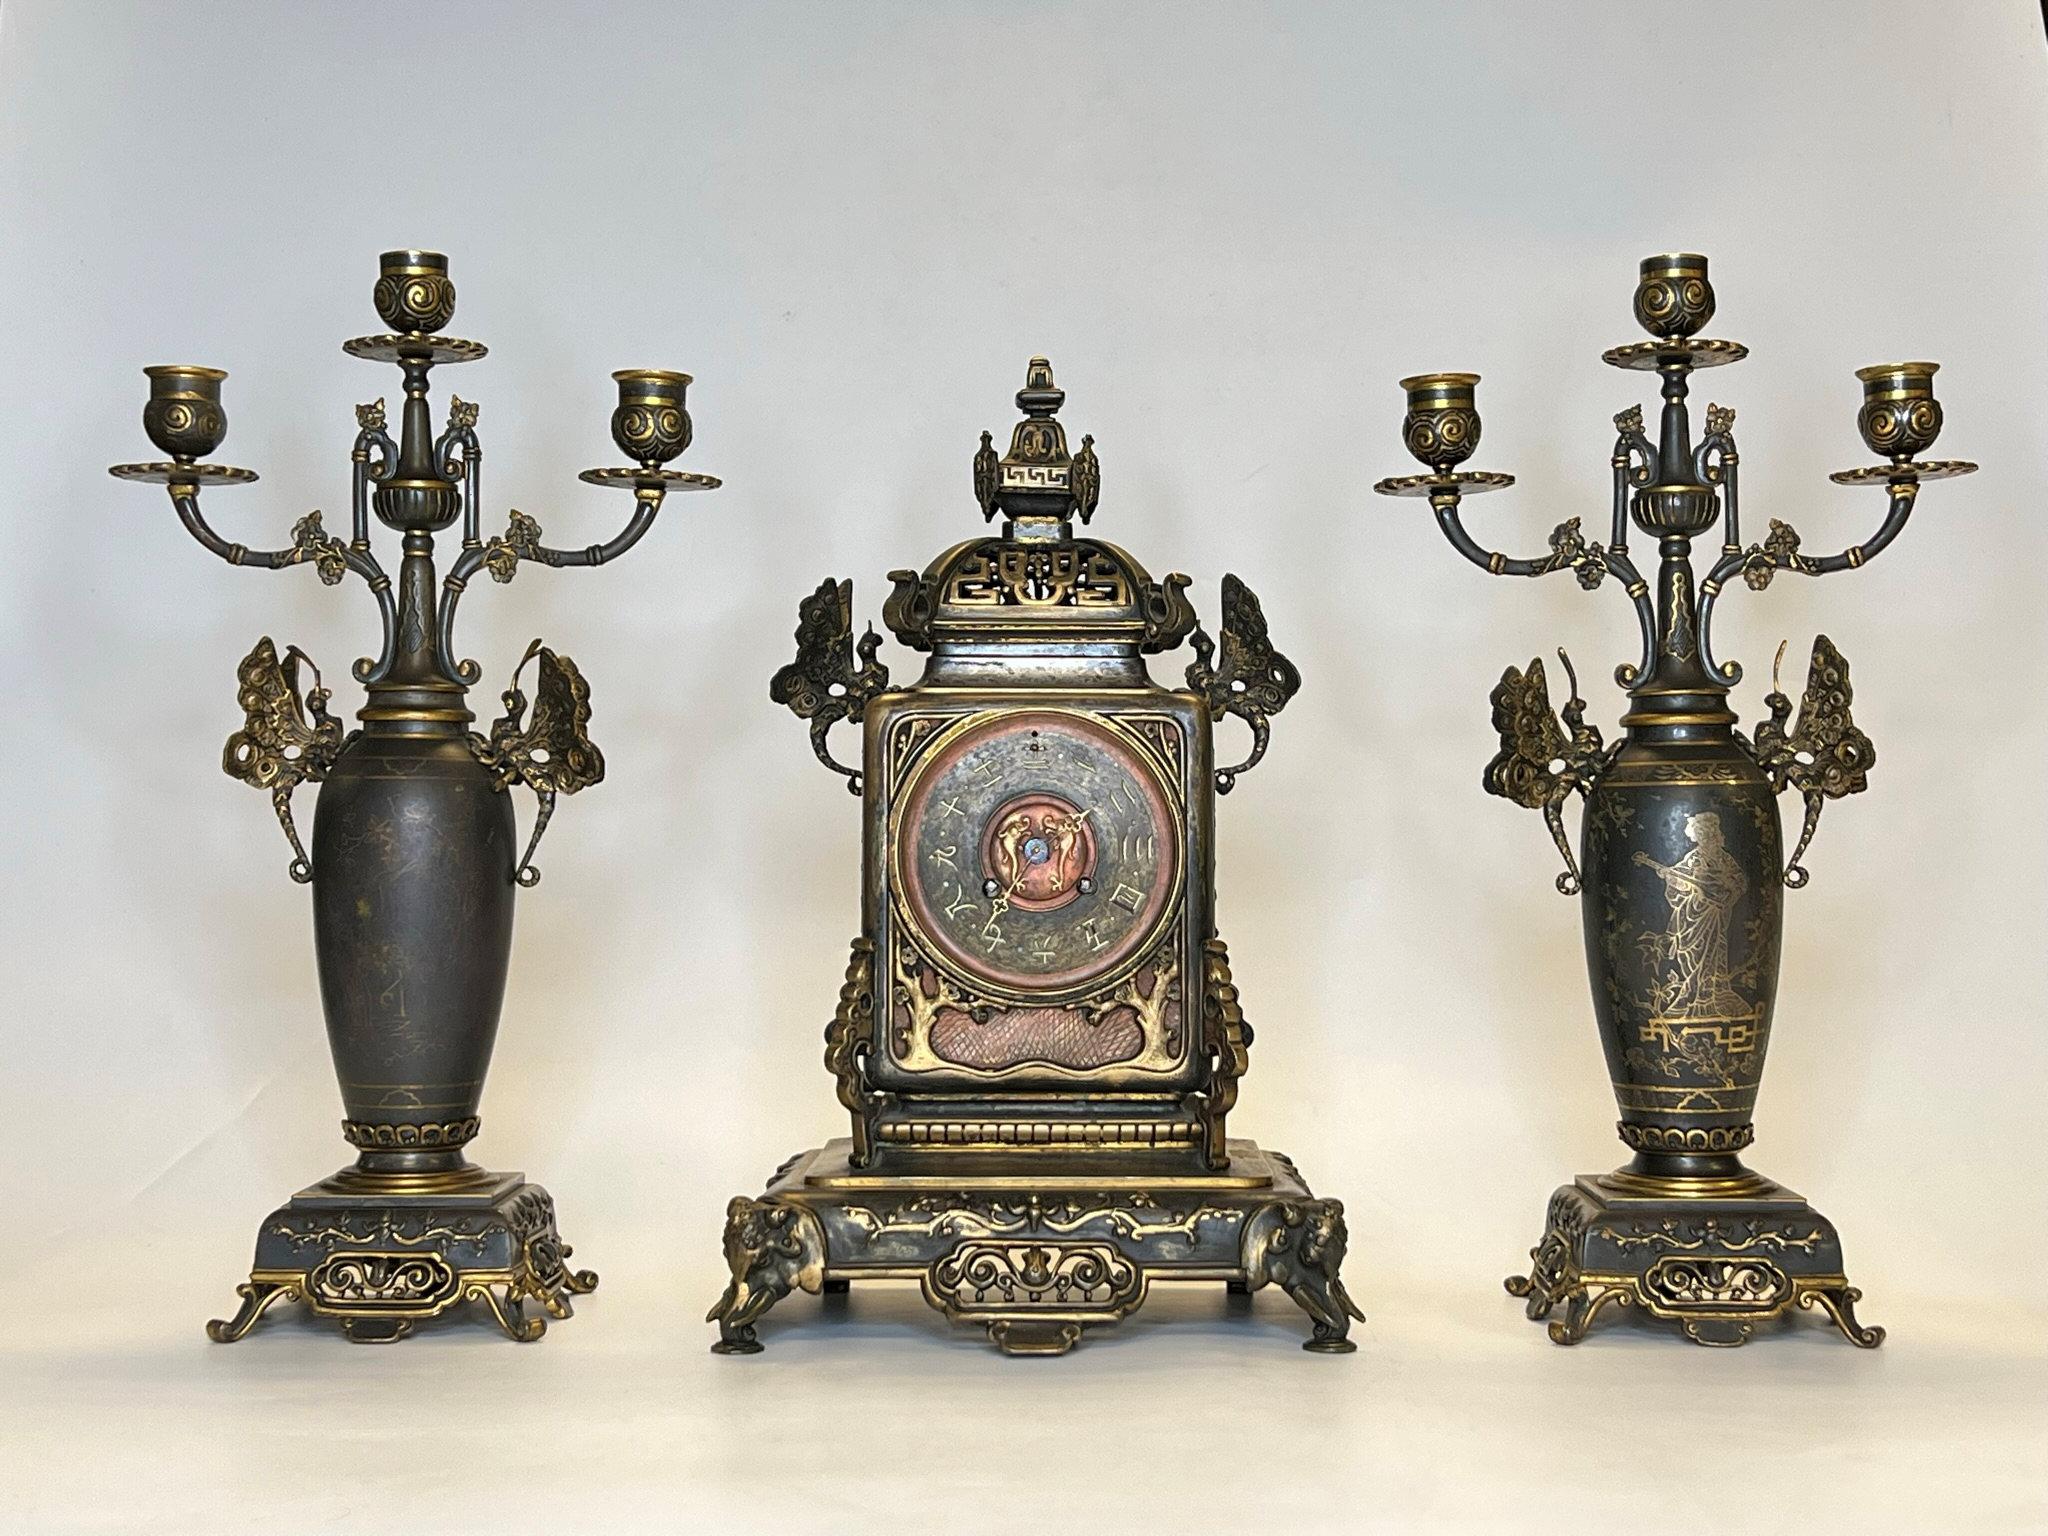 19th century French mantel clock and matching candelabra set in the Japonisme style similar to those from Christofle, with dragonflies at the shoulder of each, and each with damascened inlaid gold cartouches including maidens, herons, butterflies